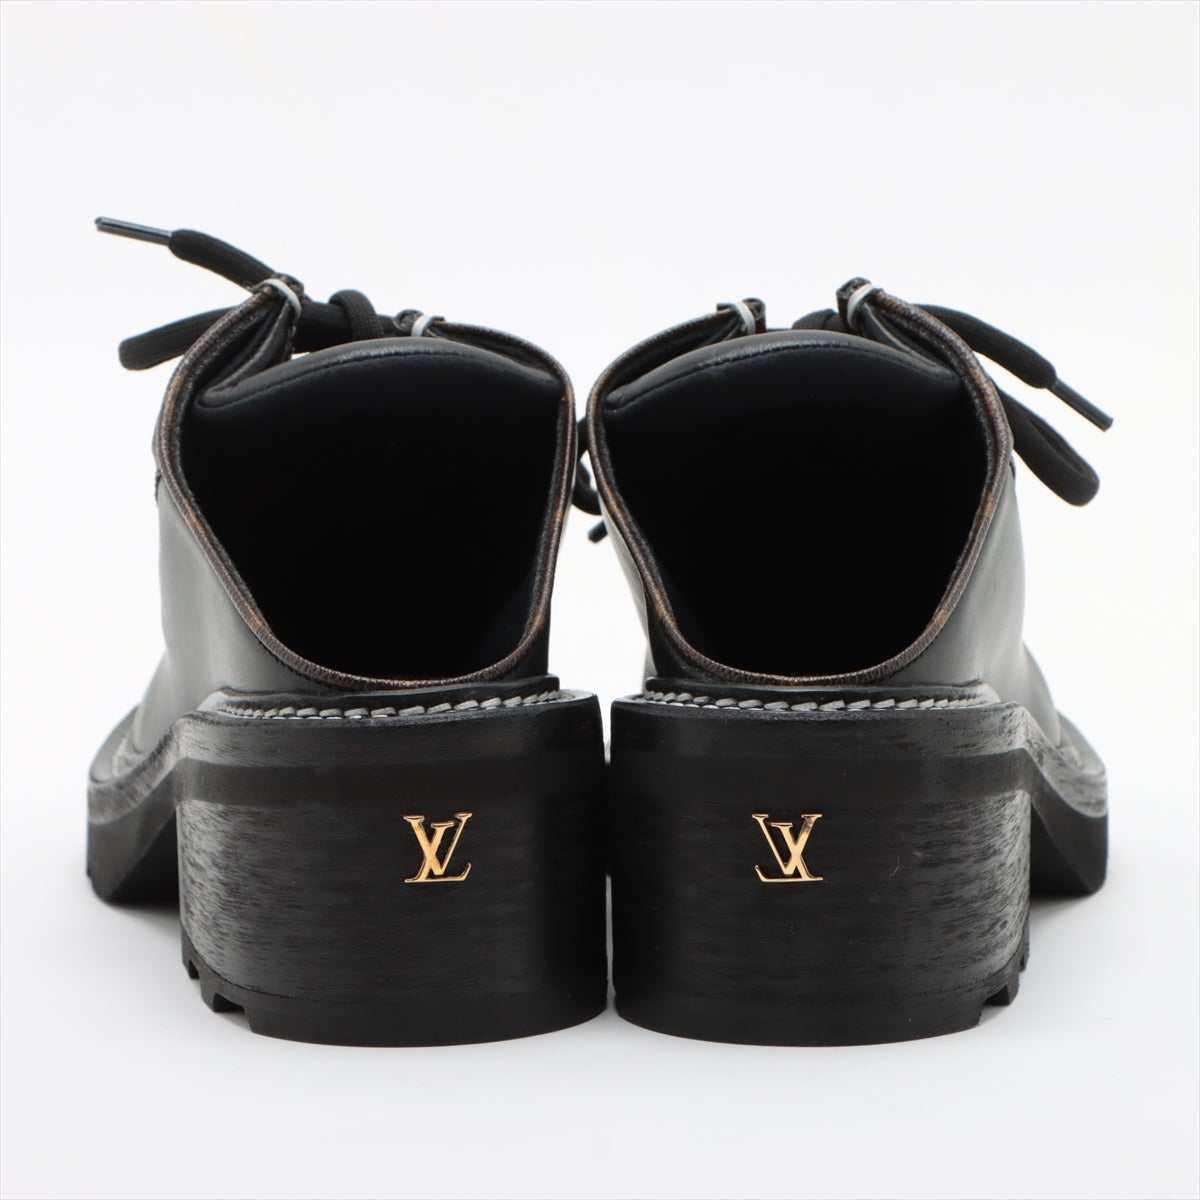 Louis Vuitton LV bobour line 19-year Leather Leather shoes 40 Ladies' Black × Brown MA1119 Monogram There is a box Has a V mark